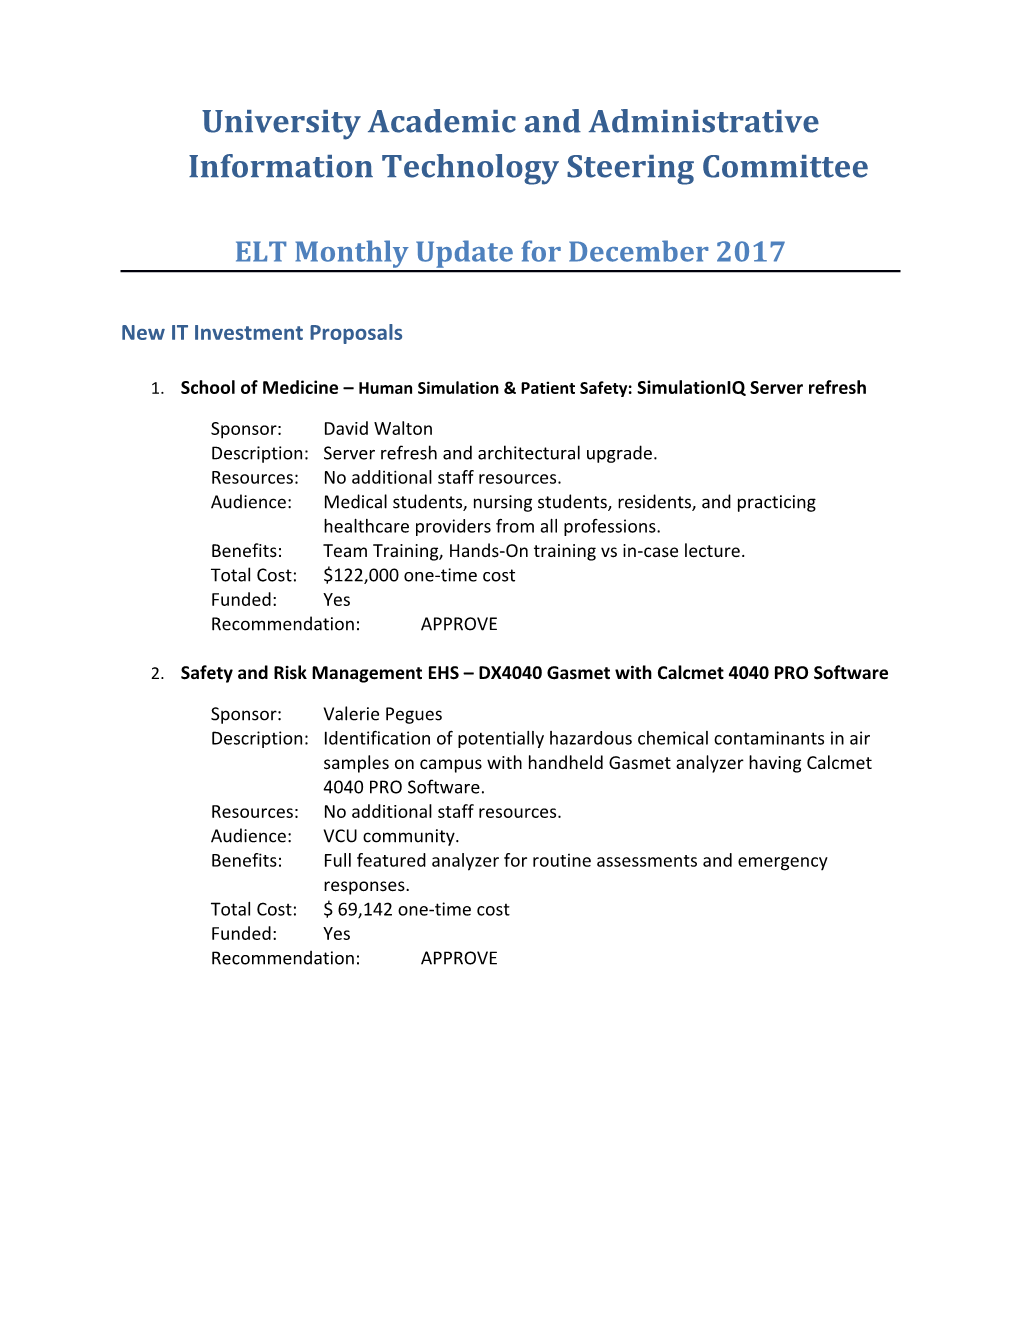 University Academic and Administrative Information Technology Steering Committee